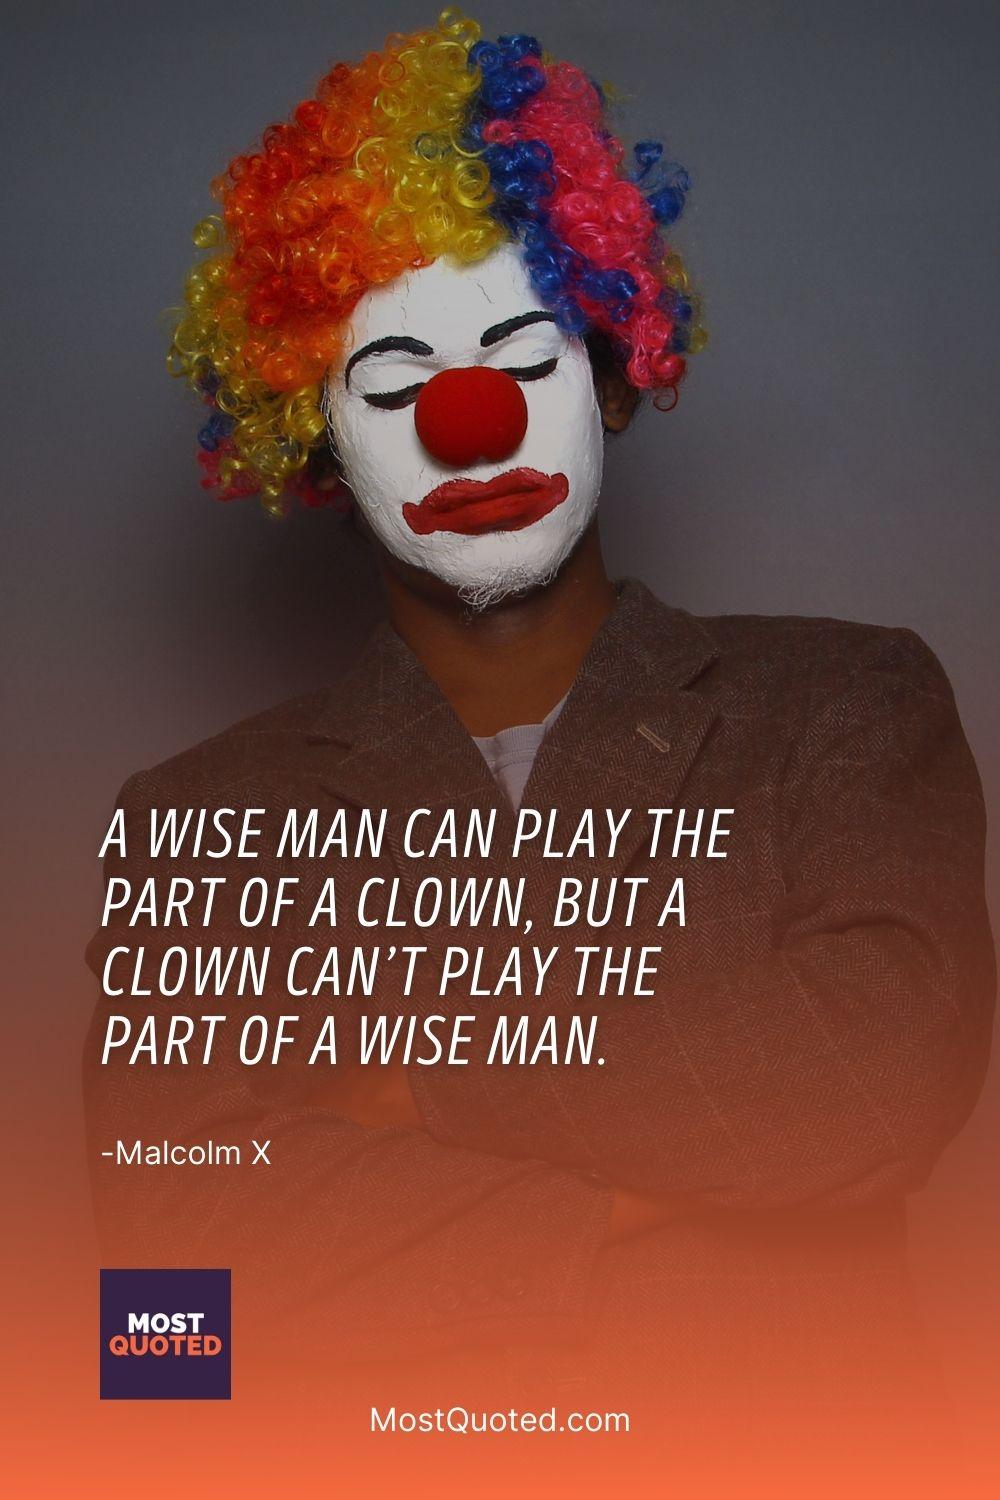 A wise man can play the part of a clown, but a clown can’t play the part of a wise man. - Malcolm X